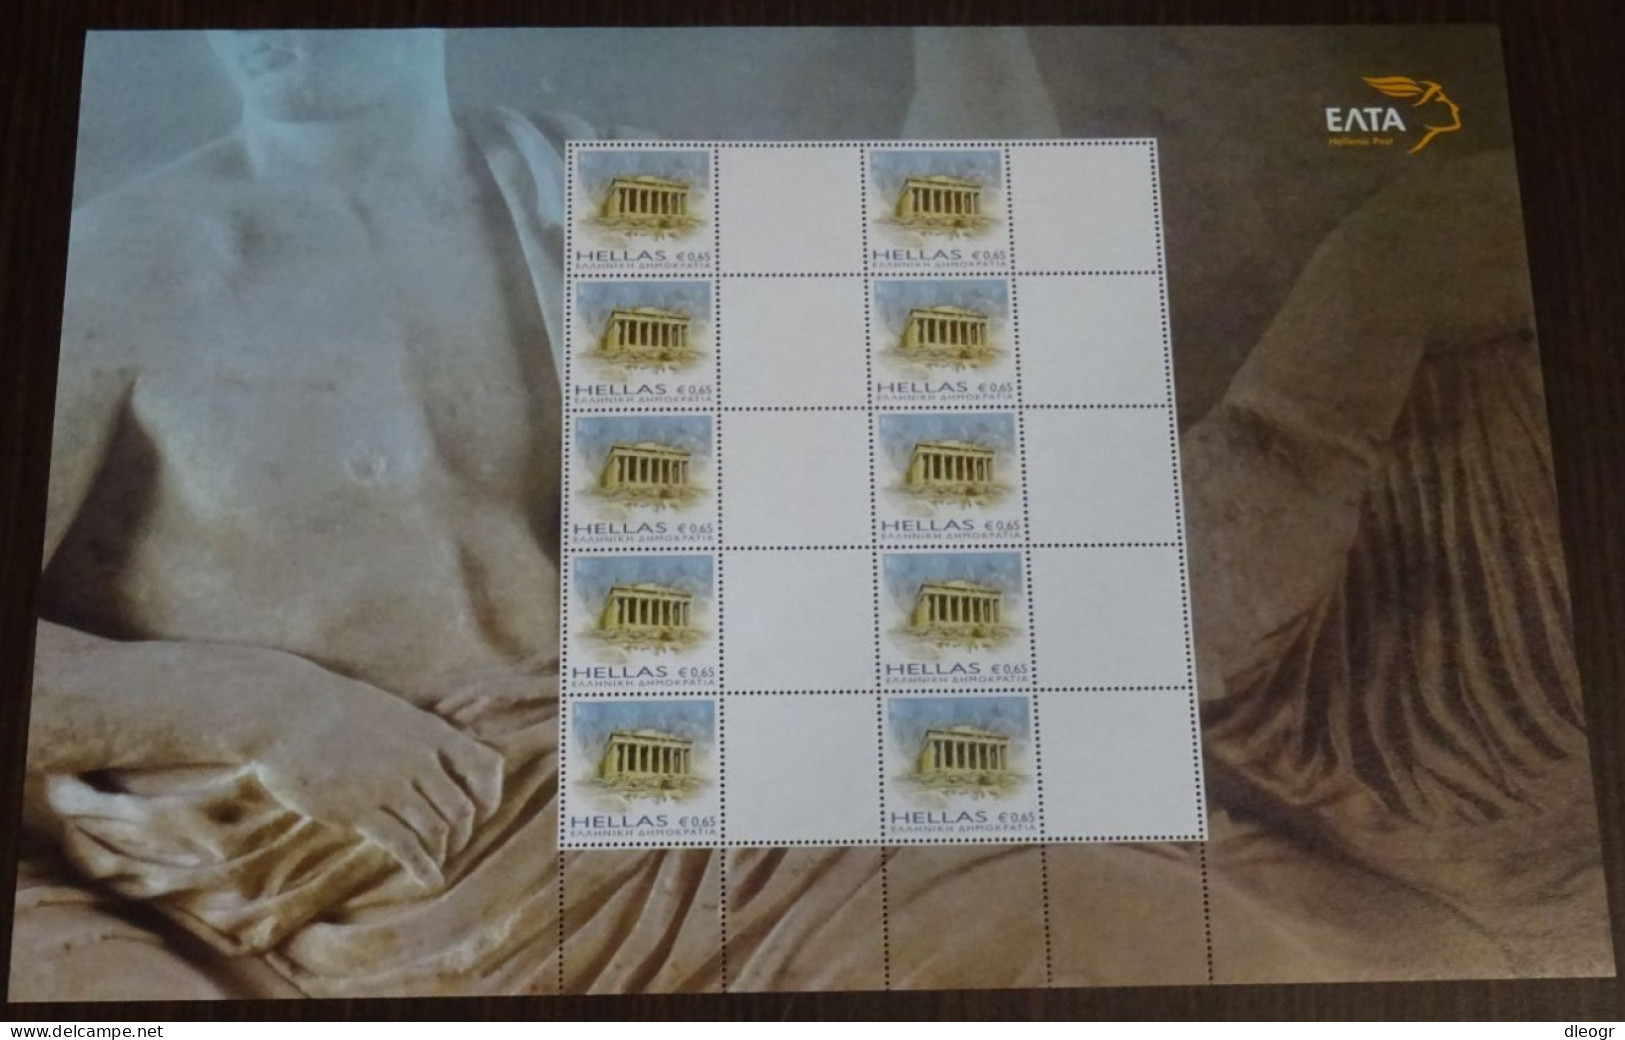 Greece 2007 SET of 7 Personalized Sheets with Blank Labels MNH